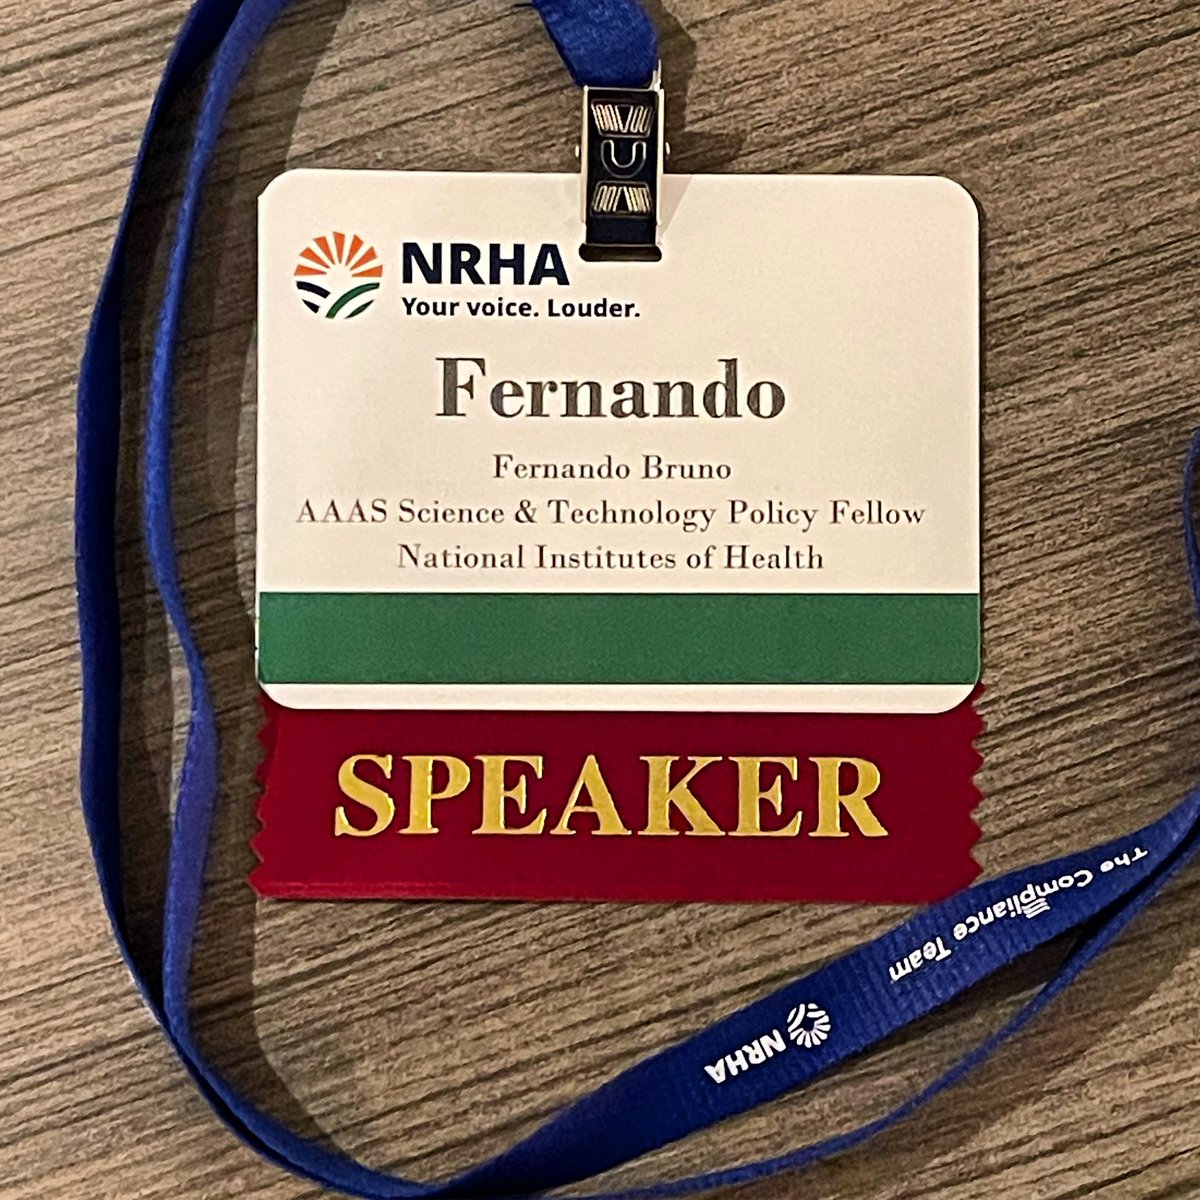 At the National Rural Health Association - Health Equity Conference.

#health #healthequity #telehealth #ruralhealth